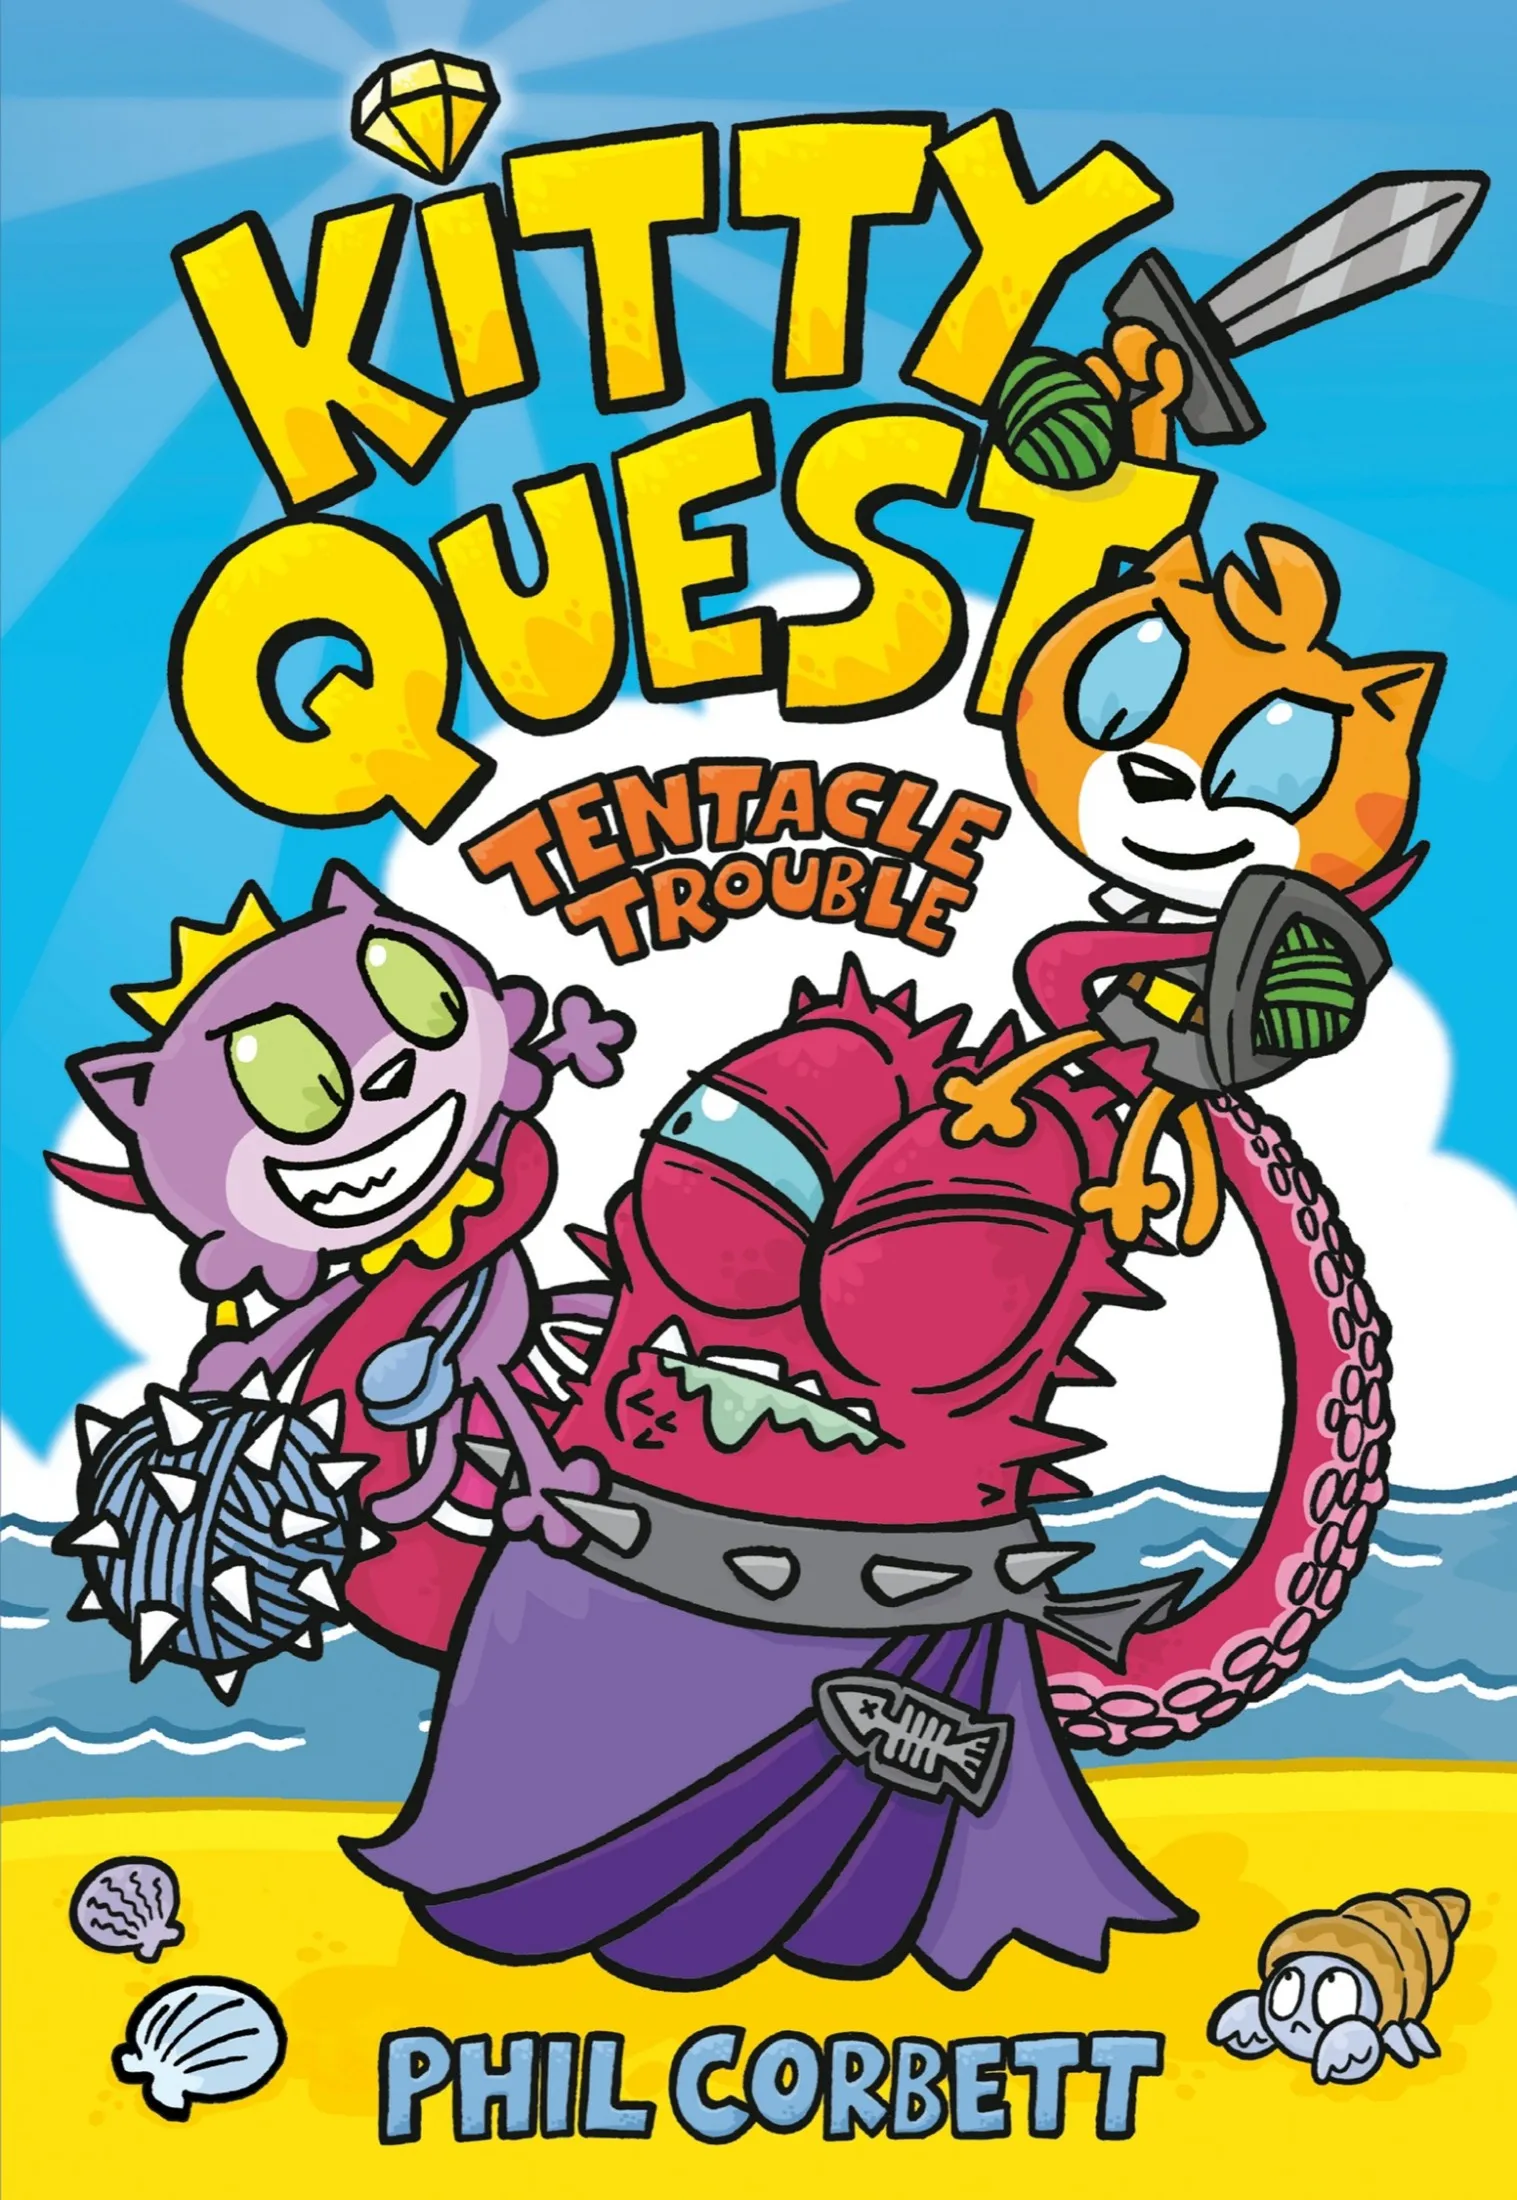 Tentacle Trouble (Kitty Quest #2)